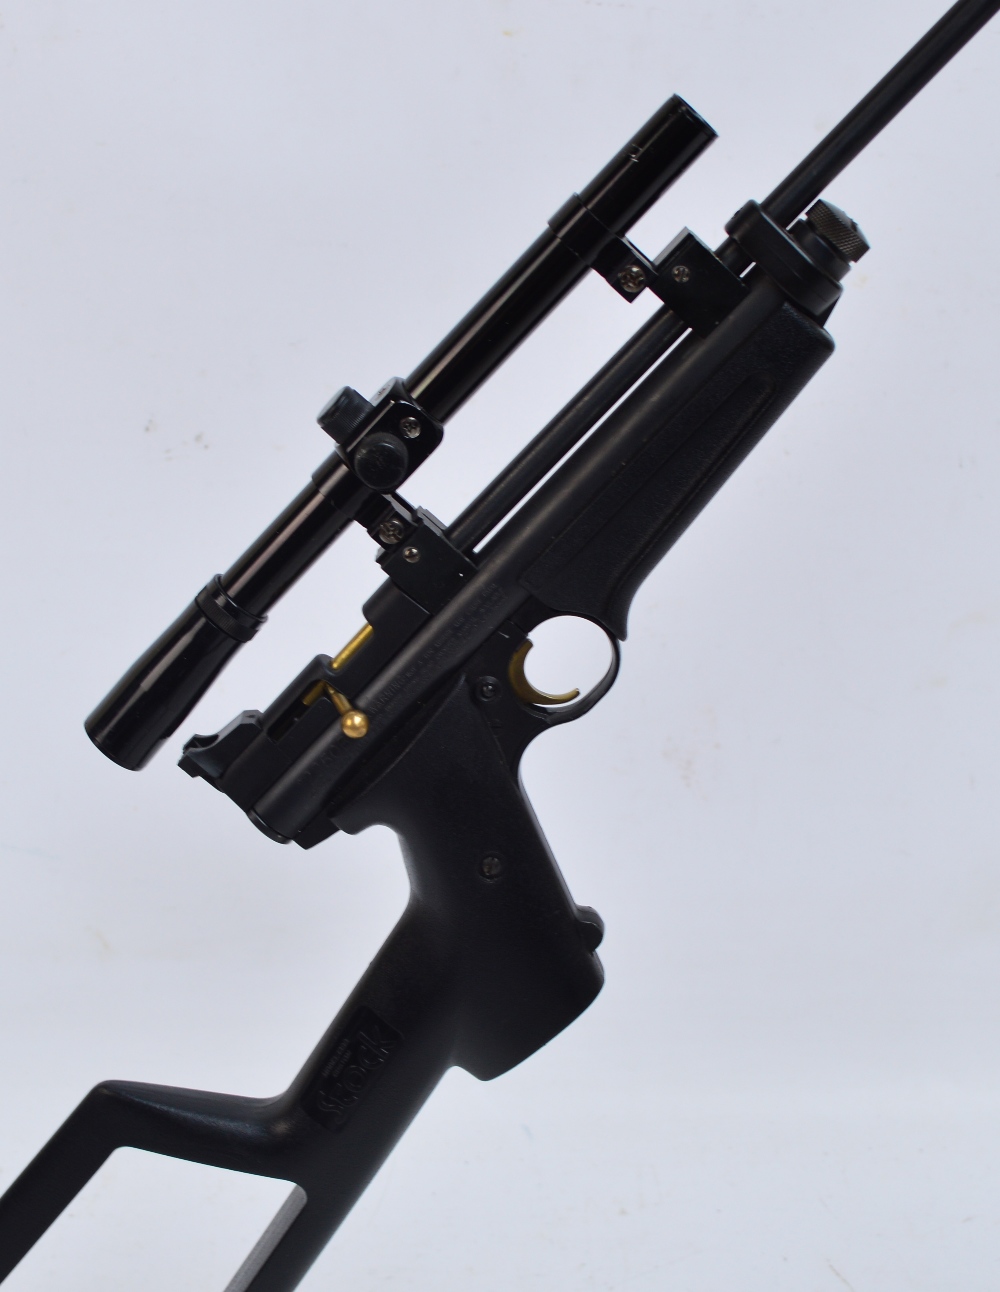 A Crossman "Ratcatcher" .22 pre charged air rifle with plastic skeleton stock and scope.